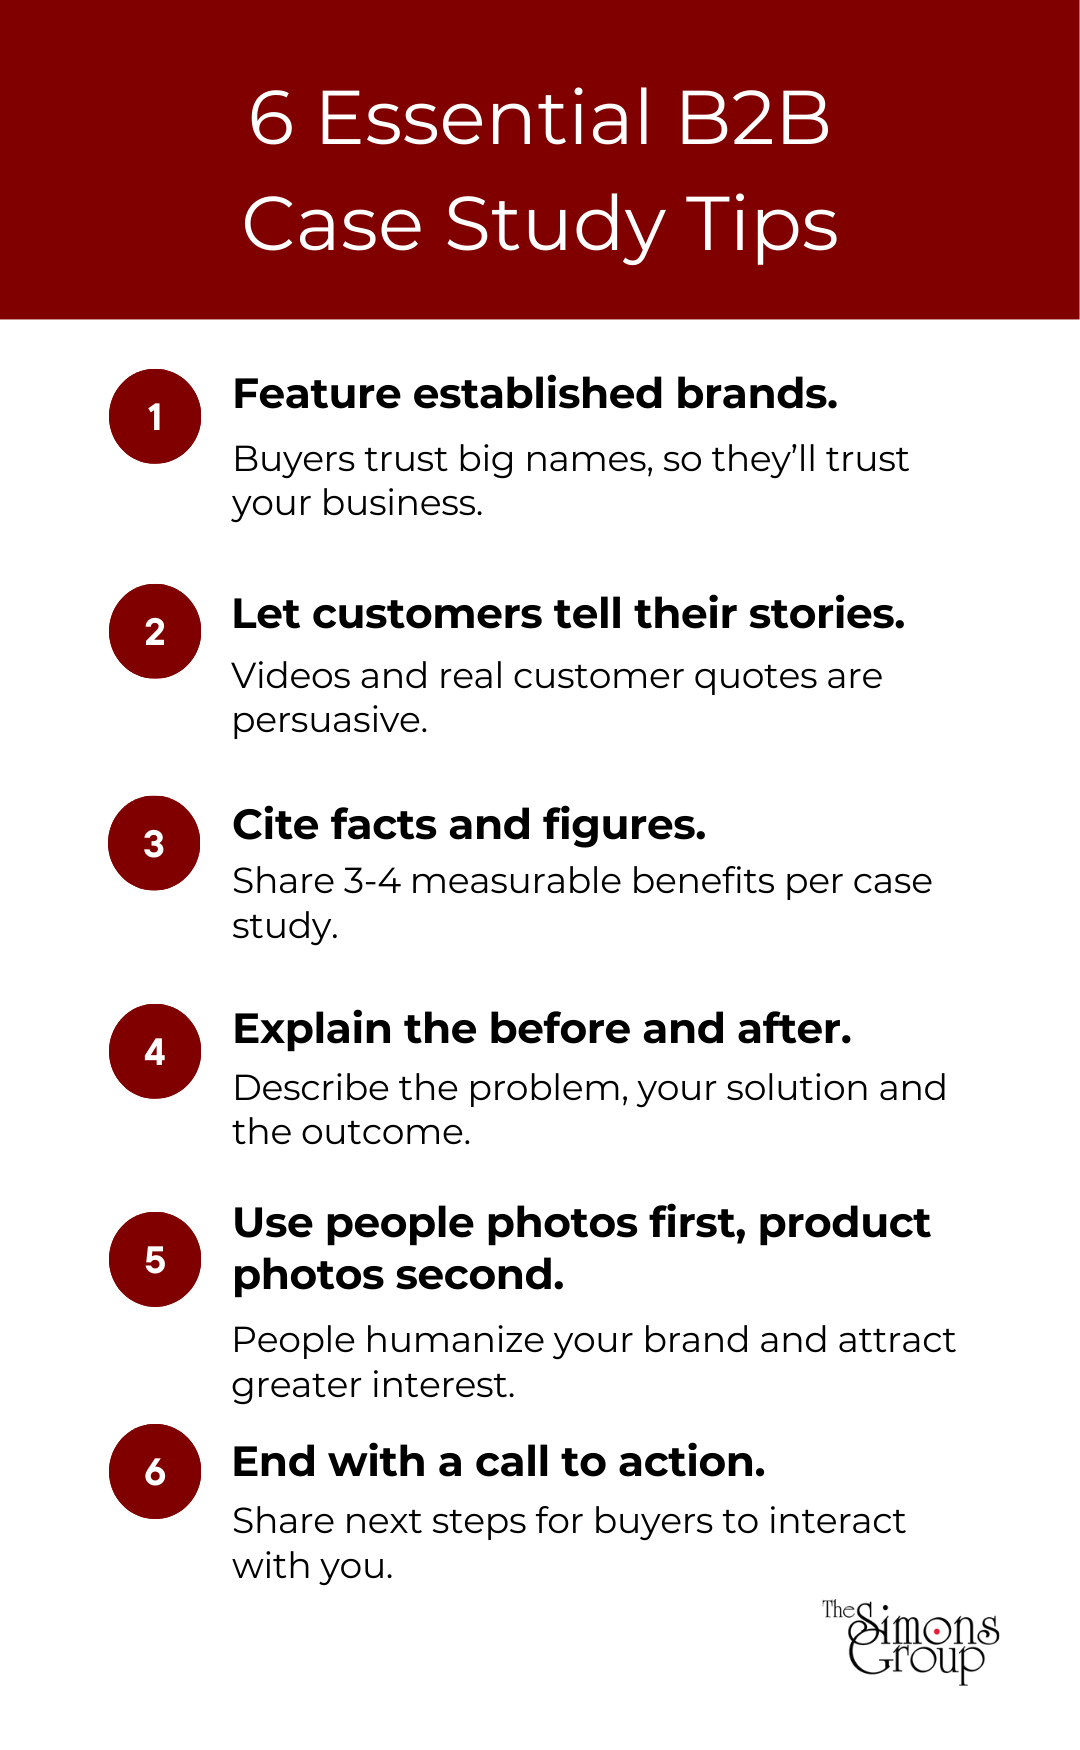 A list of 6 B2B case study tips represents best practices for customer stories.